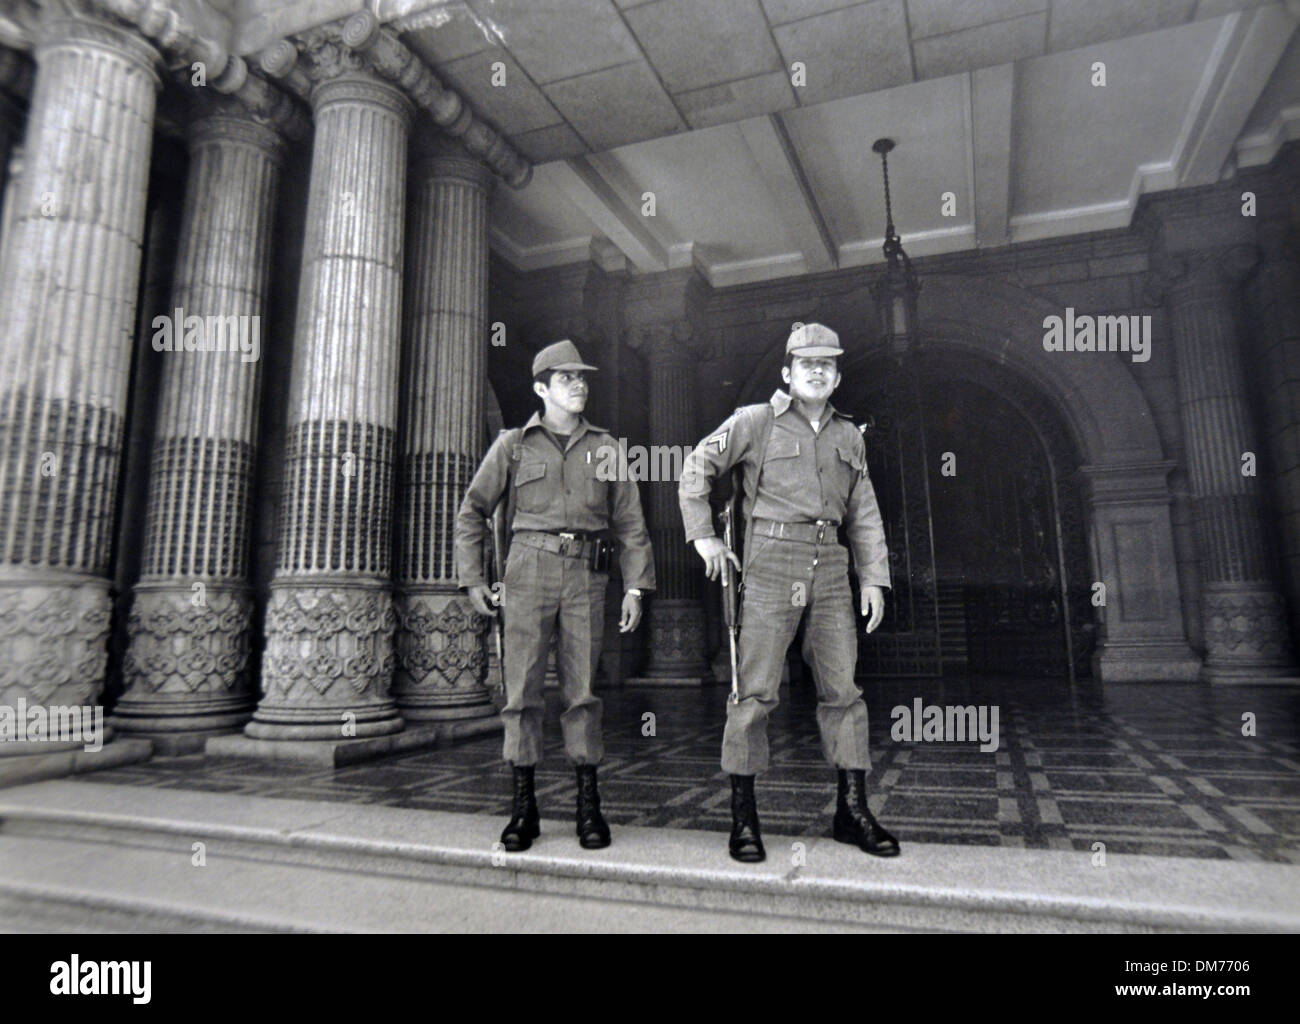 Guuatemala. Tegucigalpa. Soldiers guard Government Buildings Stock Photo